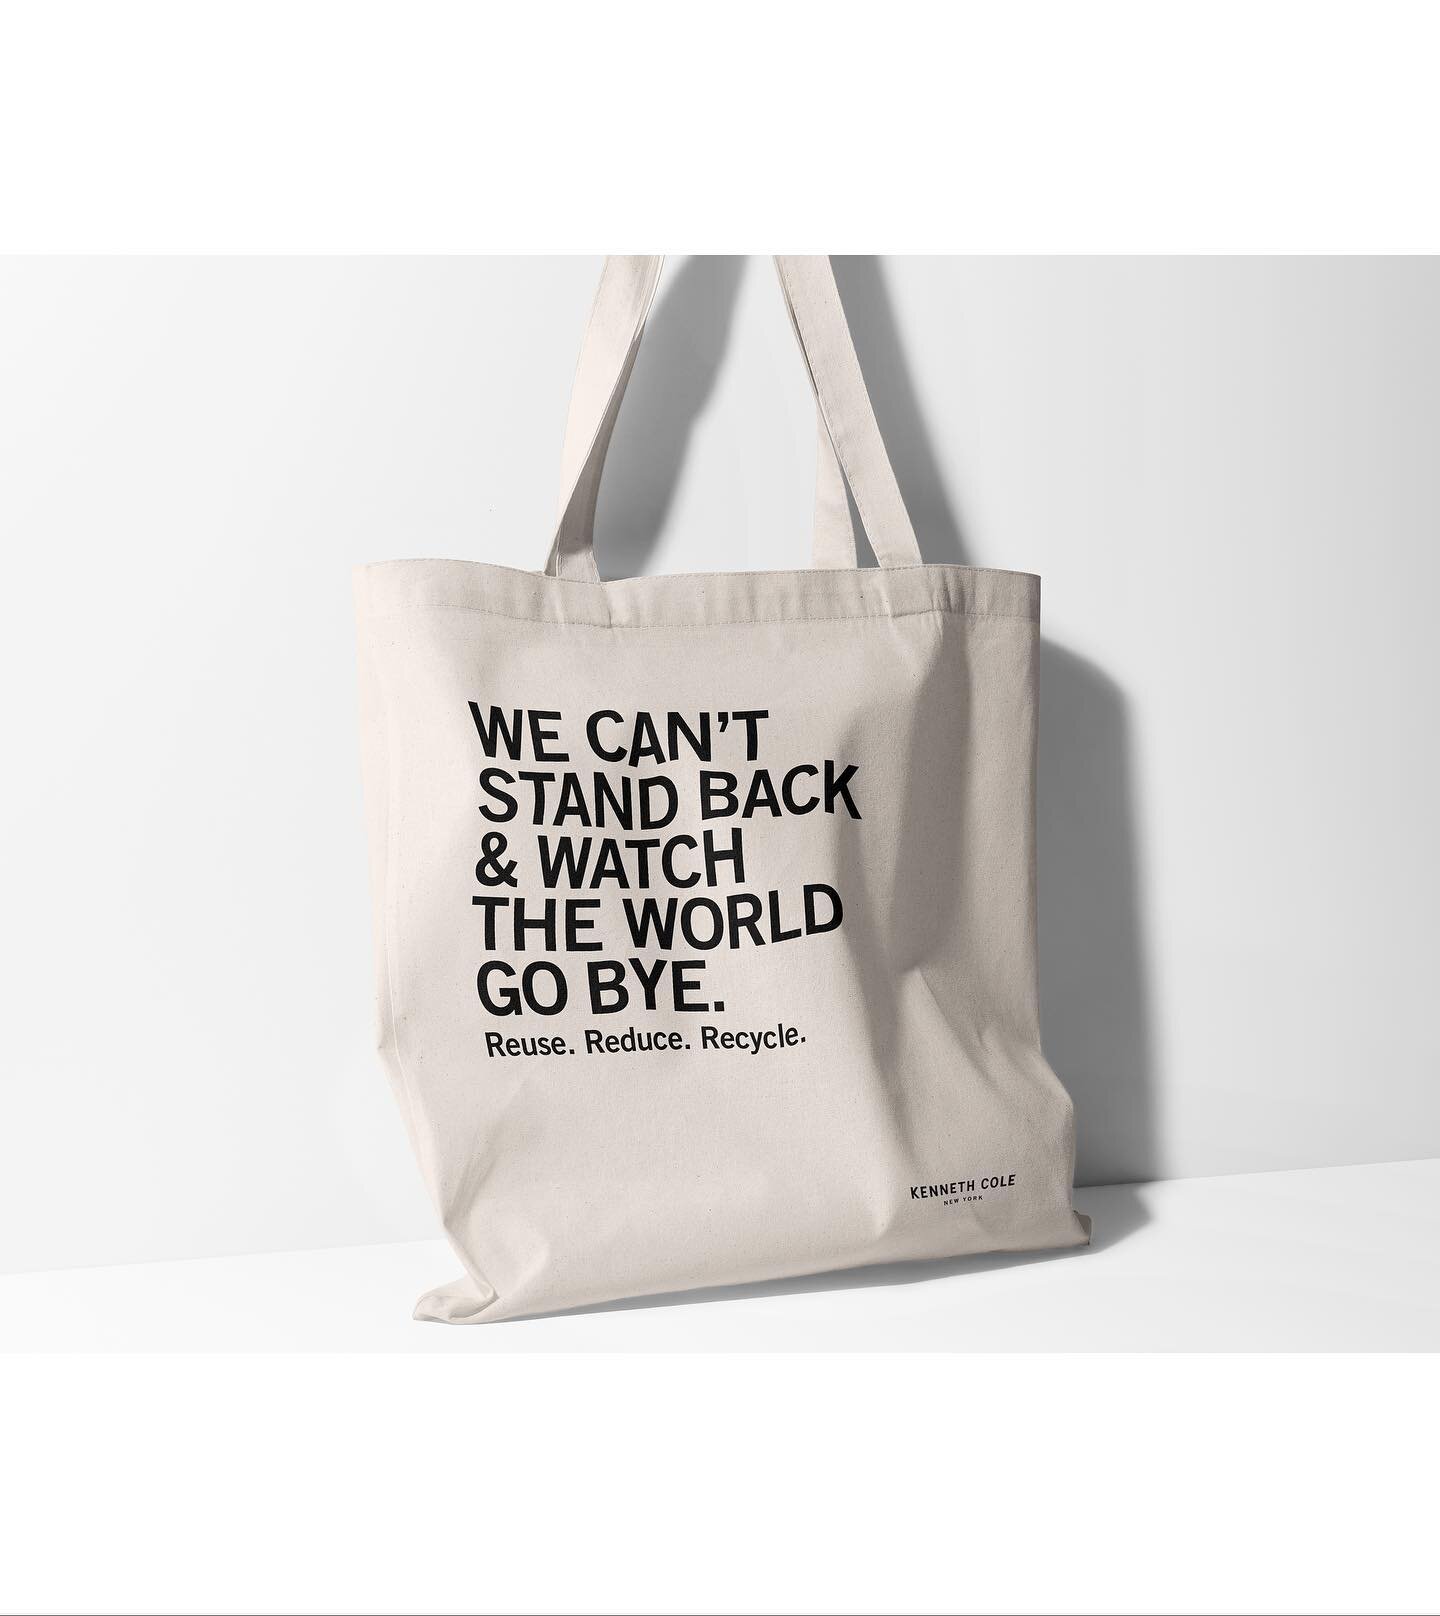 One can&rsquo;t never have too many tote bags. Tote concept designed for Kenneth Cole, supporting their Look Good, for Good initiative.

#sustainability #packagingdesign #packaging #reuse #reduce #recycle #tote #iratxecreative #designwithpurpose